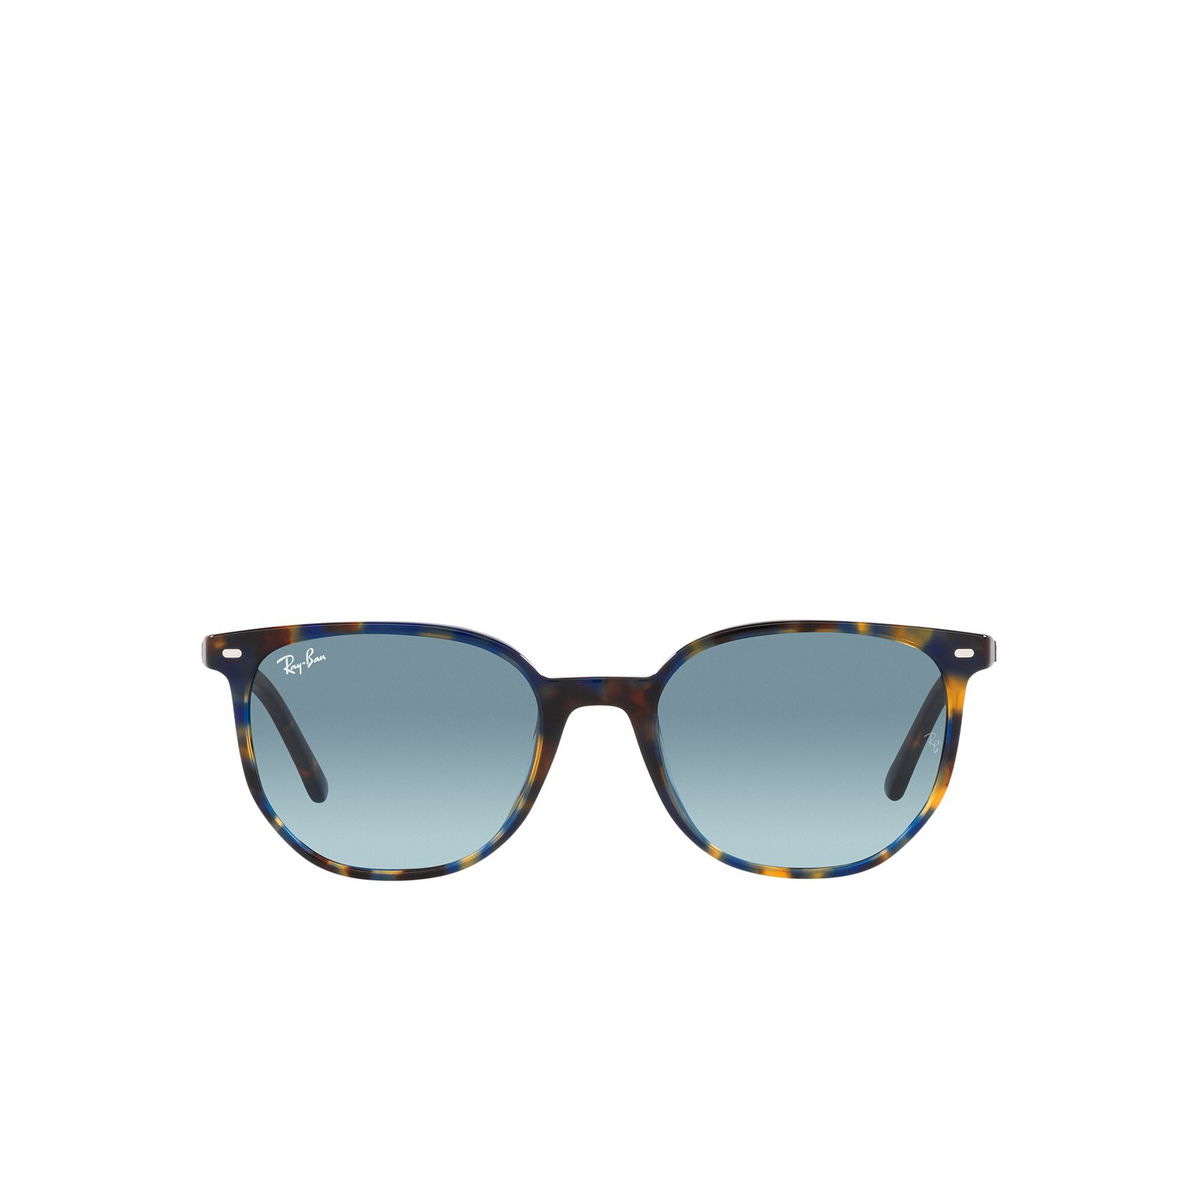 Ray-Ban® Square Sunglasses: Elliot RB2197 color Yellow & Blue Havana 13563M - front view.